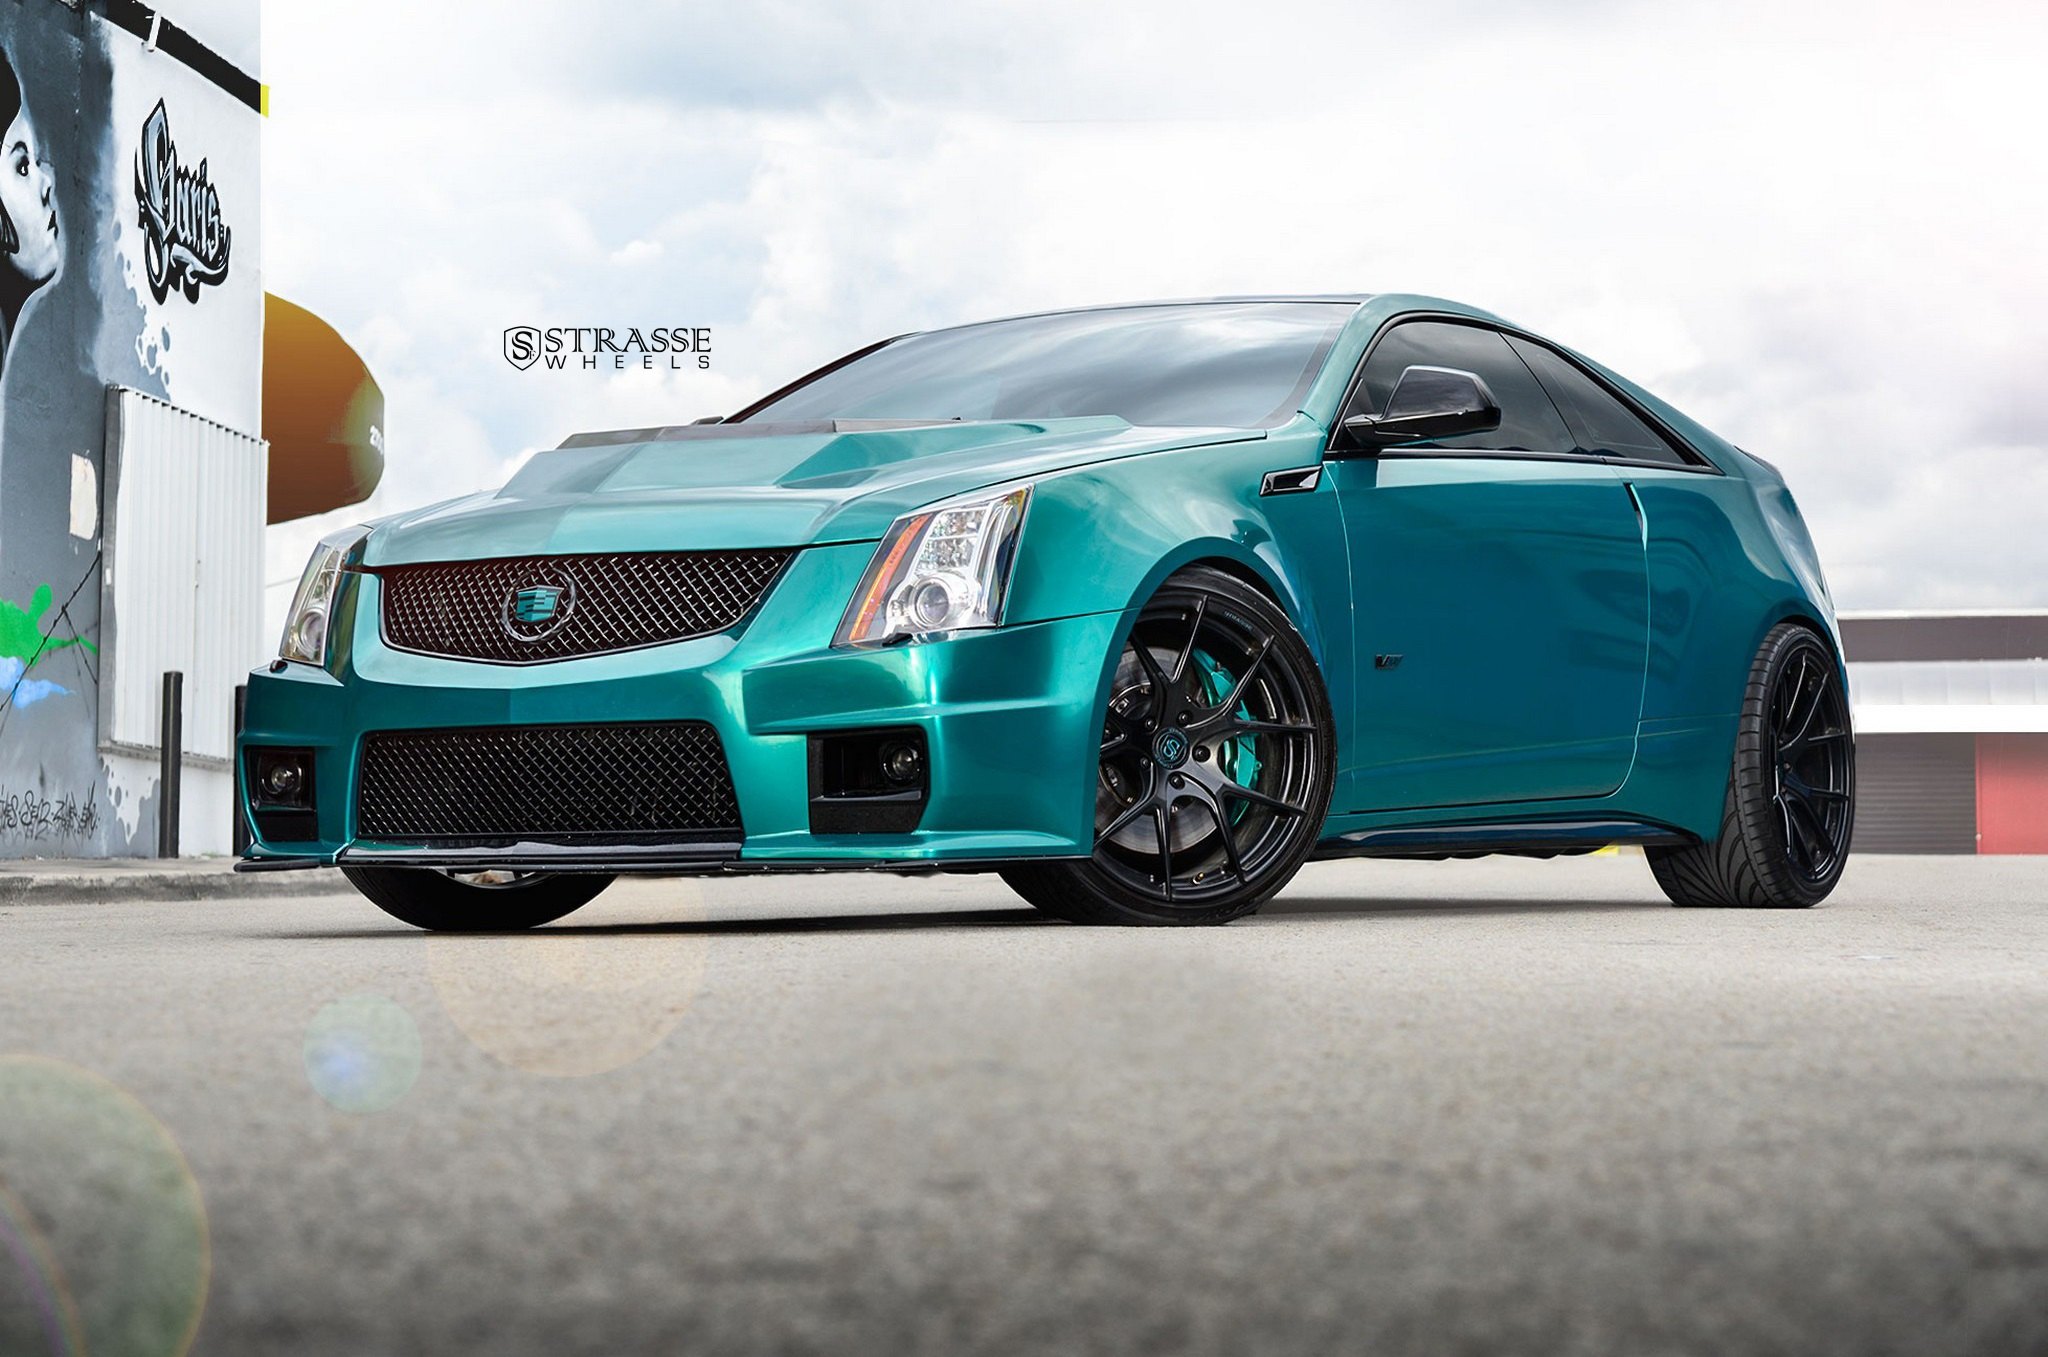 Green Cadillac CTS with Blacked Out Mesh Grille - Photo by Strasse Forged